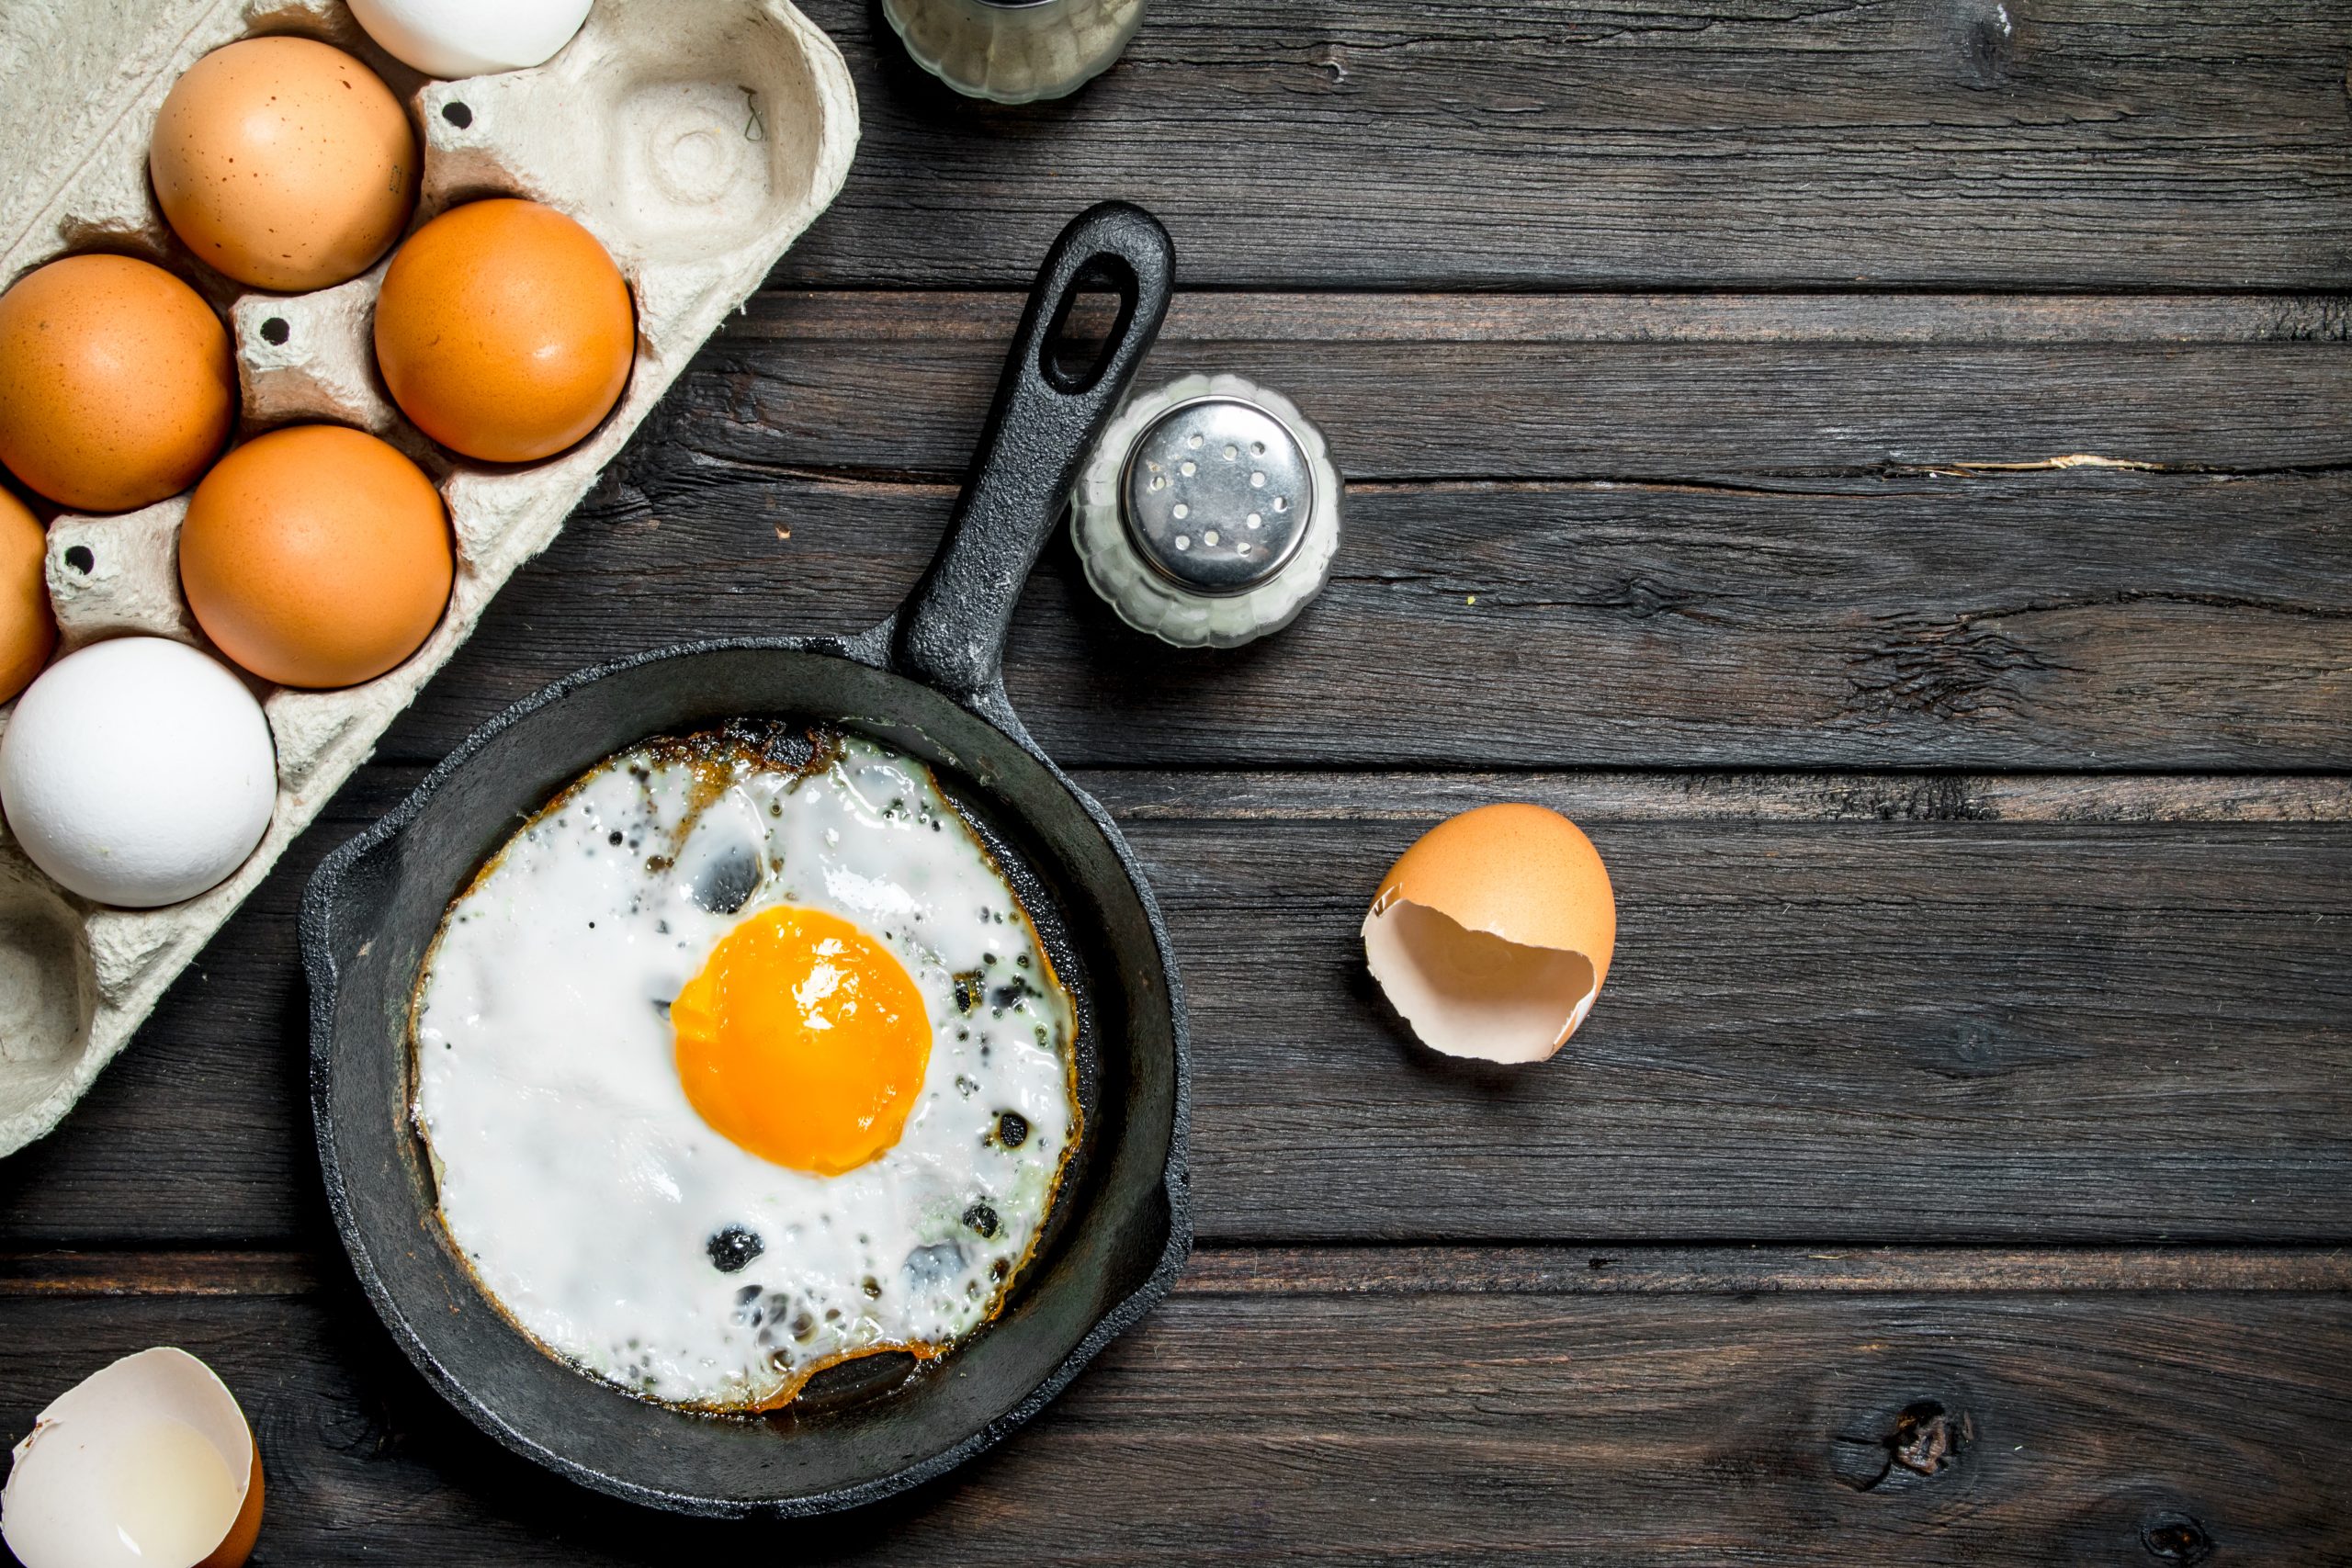 Fried-Egg-in-a-Frying-Pan-and-whole-eggs-on-tray